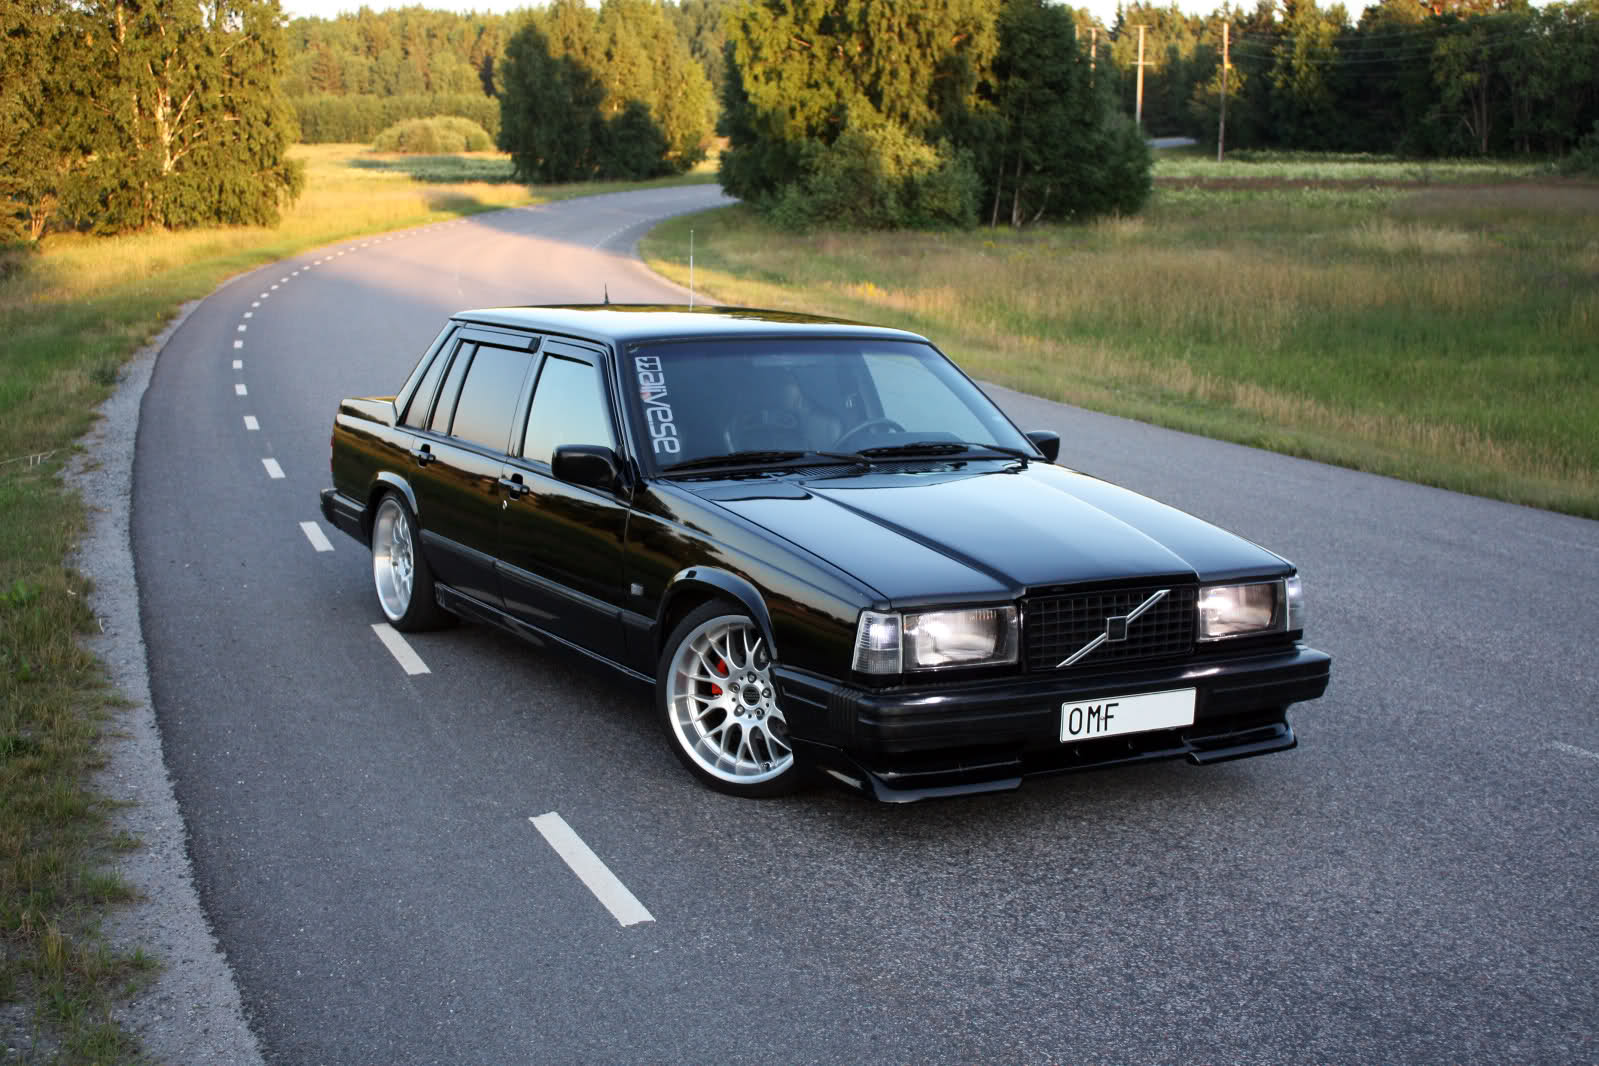 Volvo 740 Wallpapers Wallpaper Cave